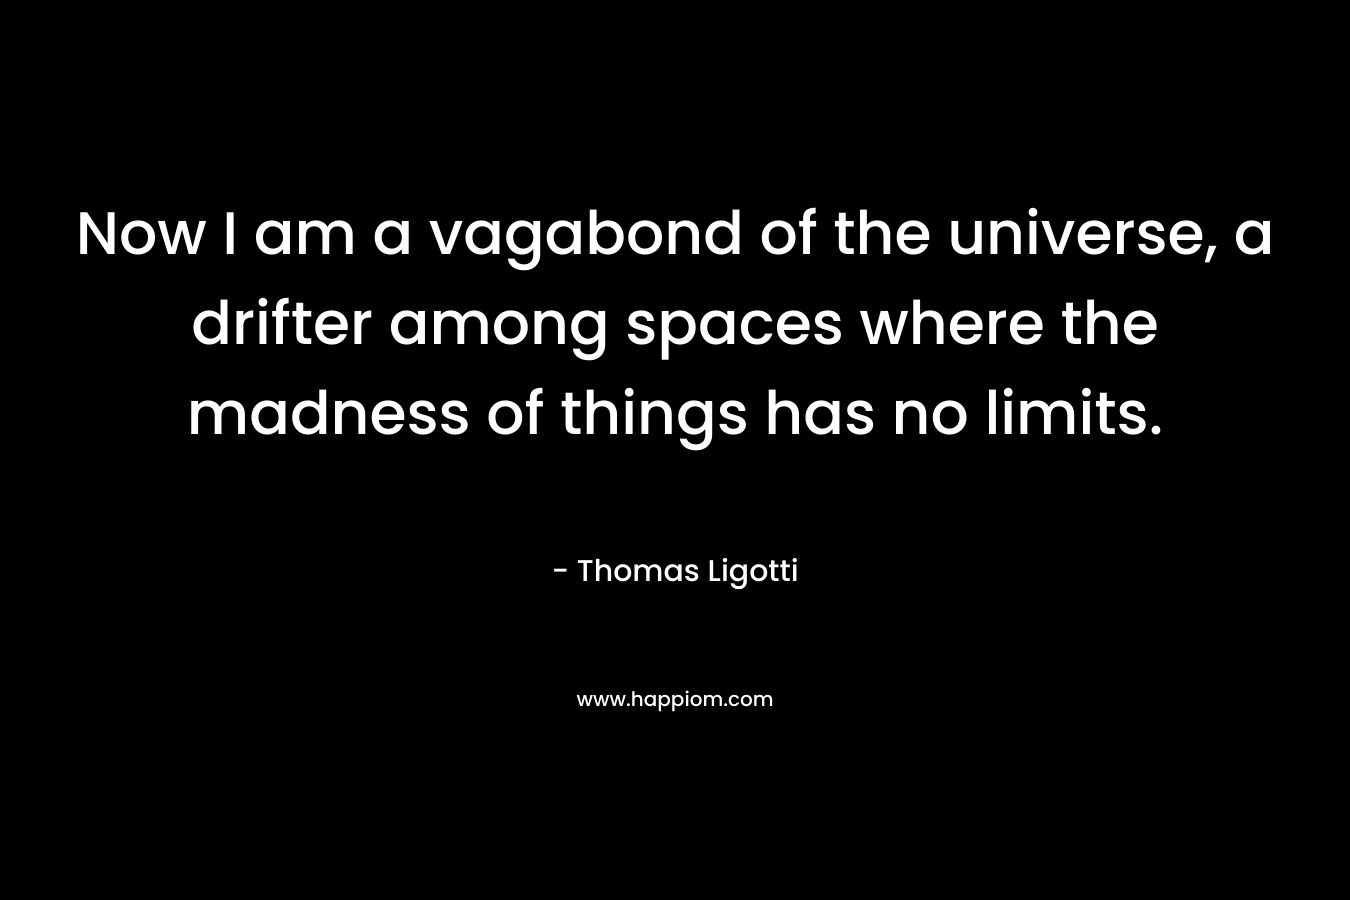 Now I am a vagabond of the universe, a drifter among spaces where the madness of things has no limits. – Thomas Ligotti